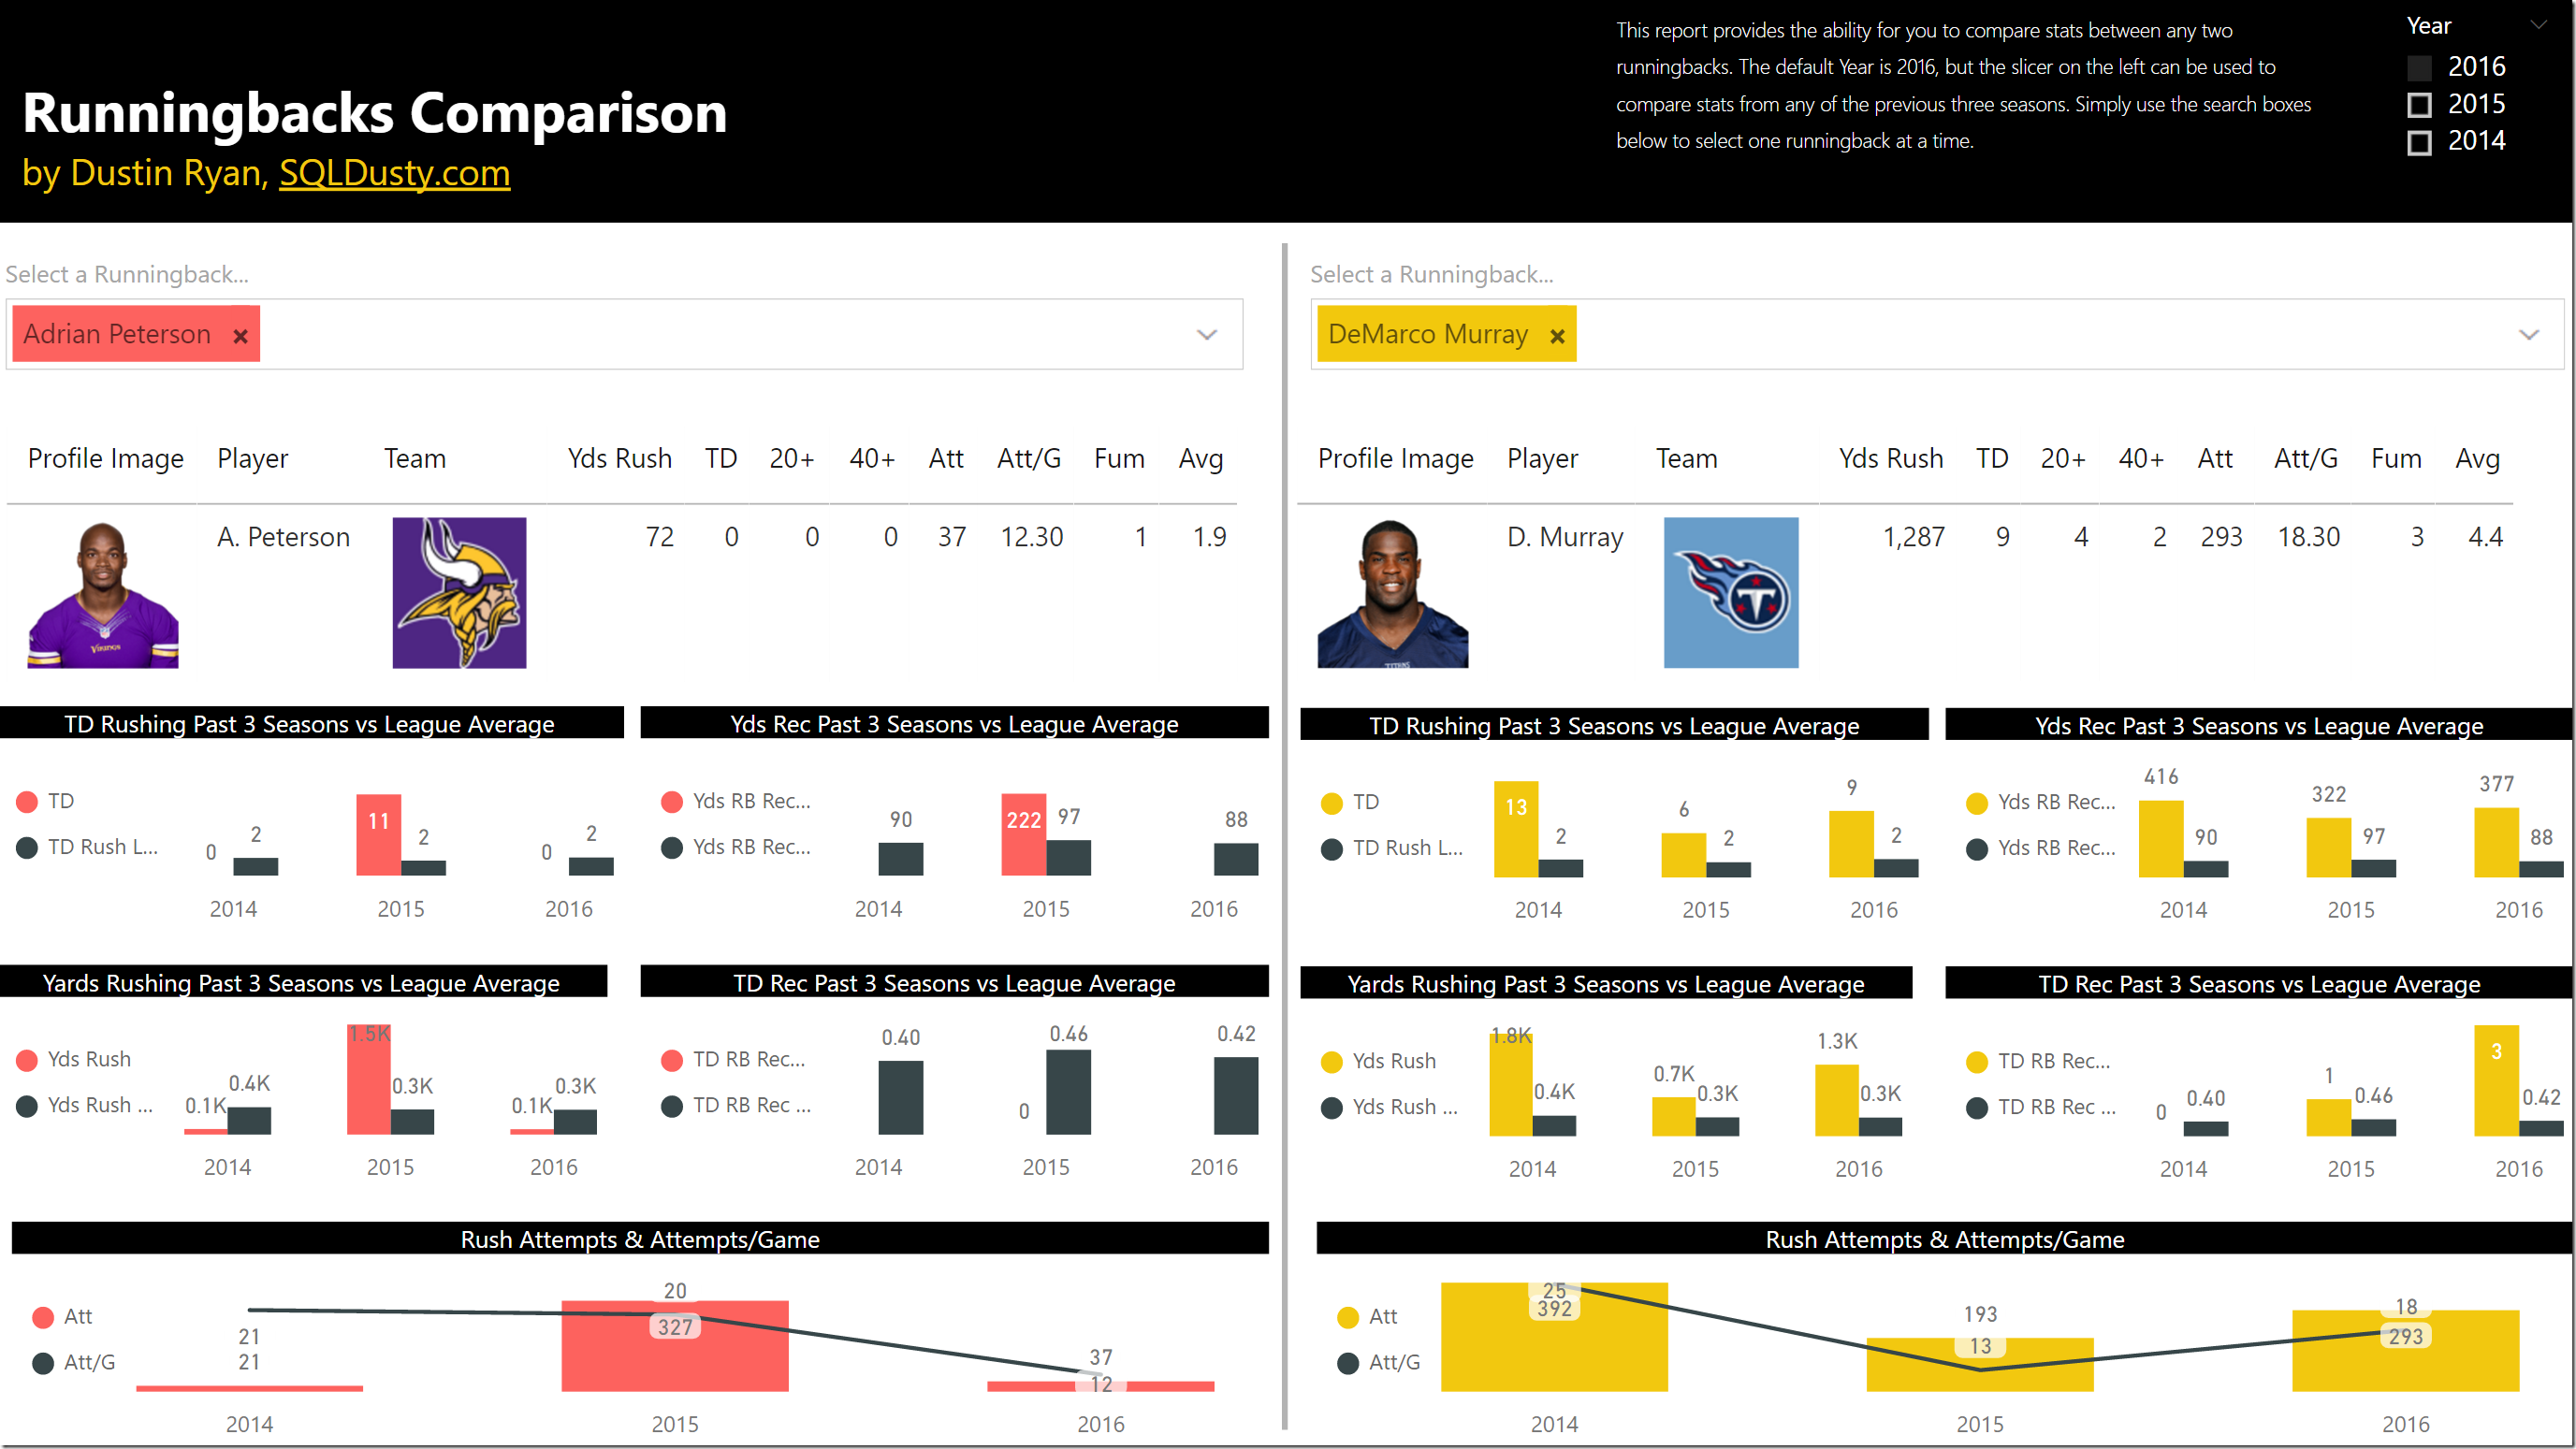 Power BI NFL Football Stats Comparisons and Analysis Report is now